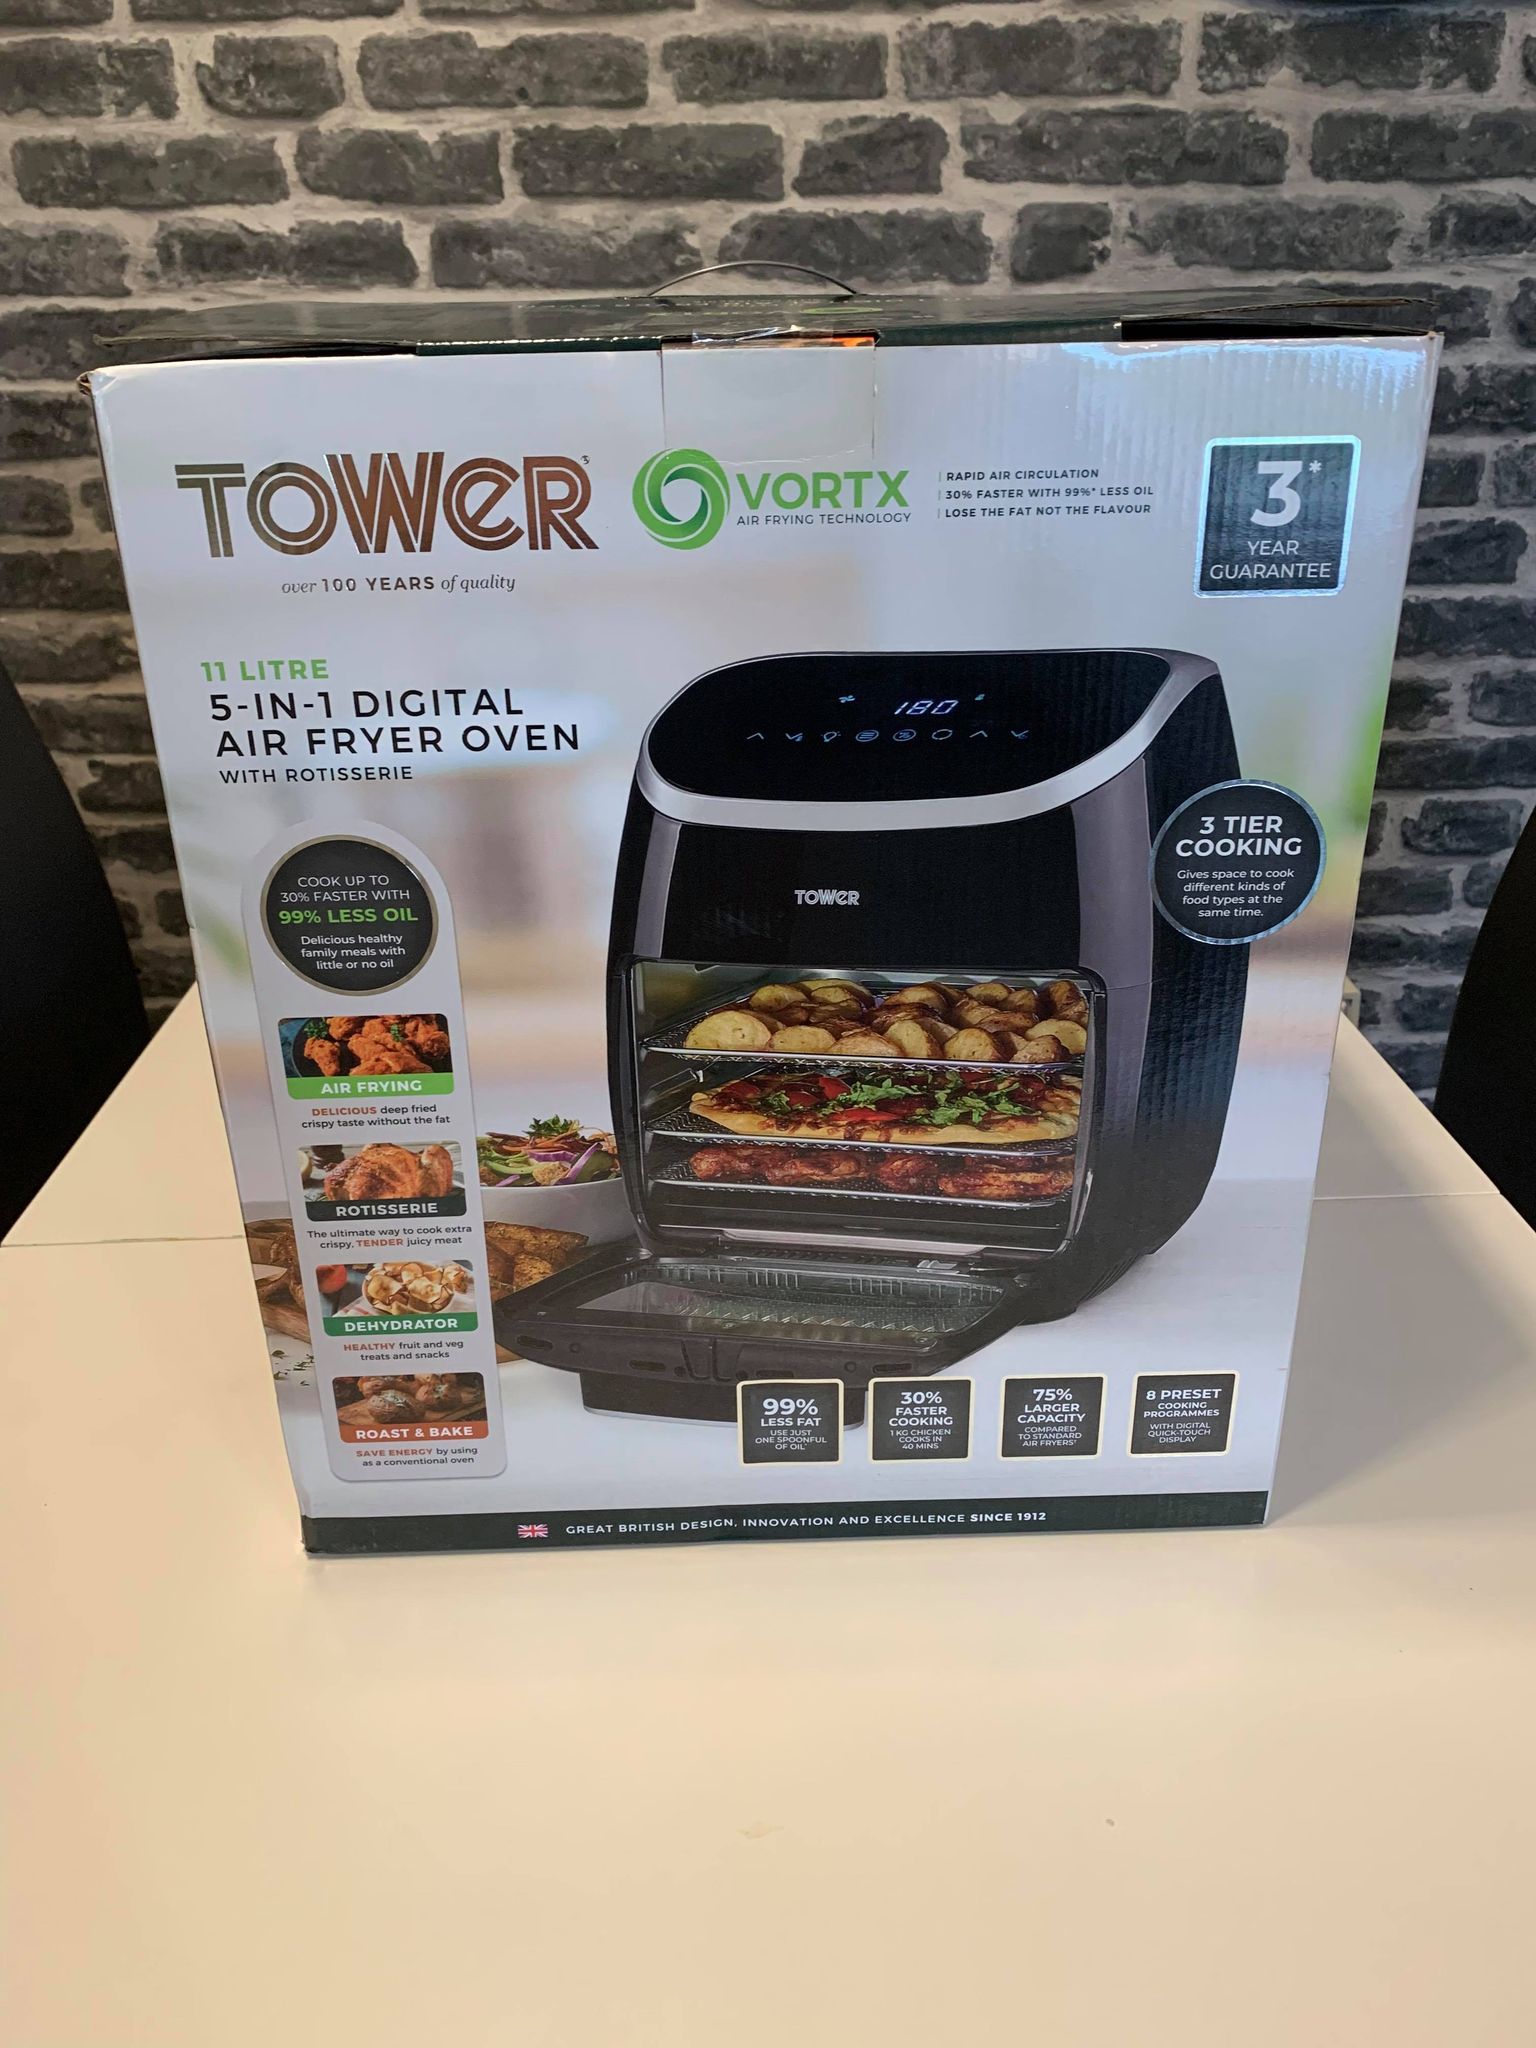 https://northcoastcomps.co.uk/wp-content/uploads/2021/07/tower-air-frier.jpg